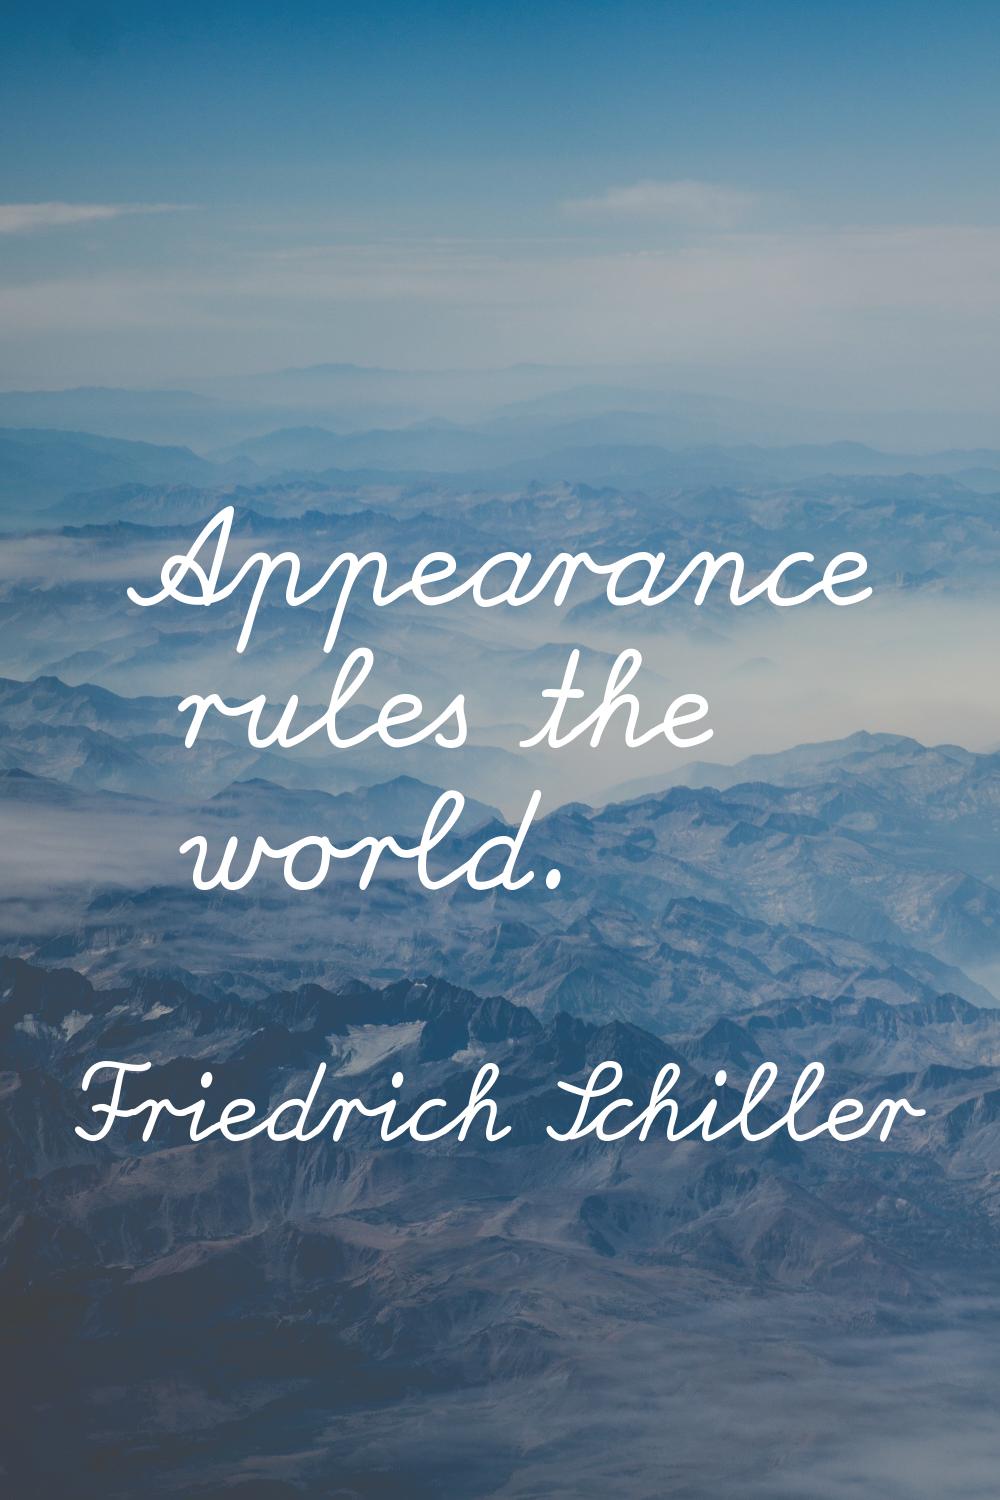 Appearance rules the world.